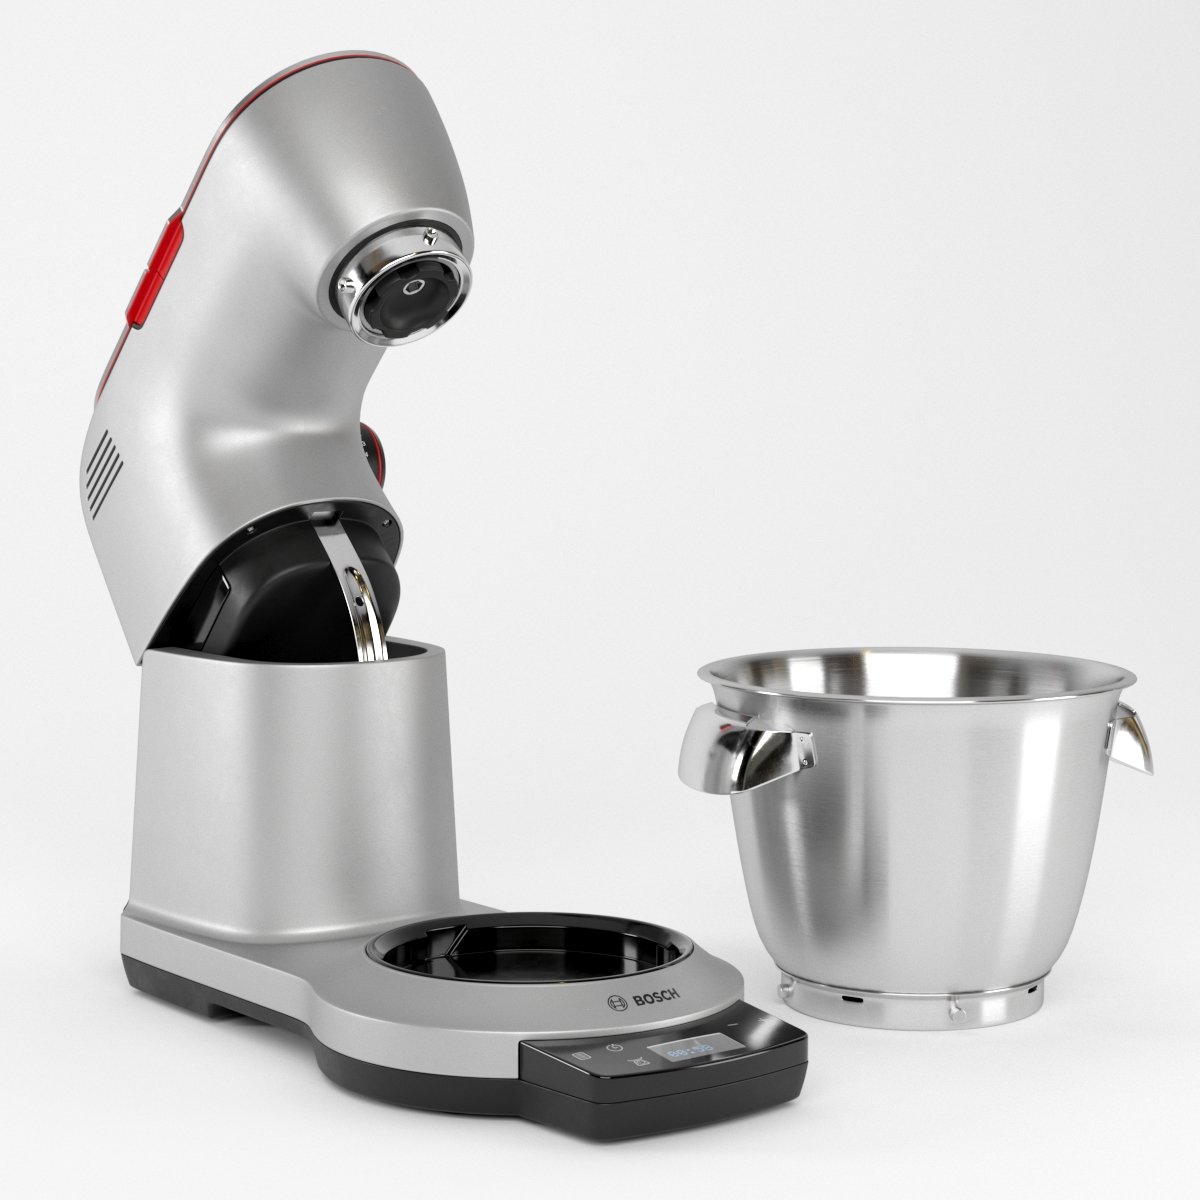 Which is the best Bosch Optimum Food Processor & Mixer?